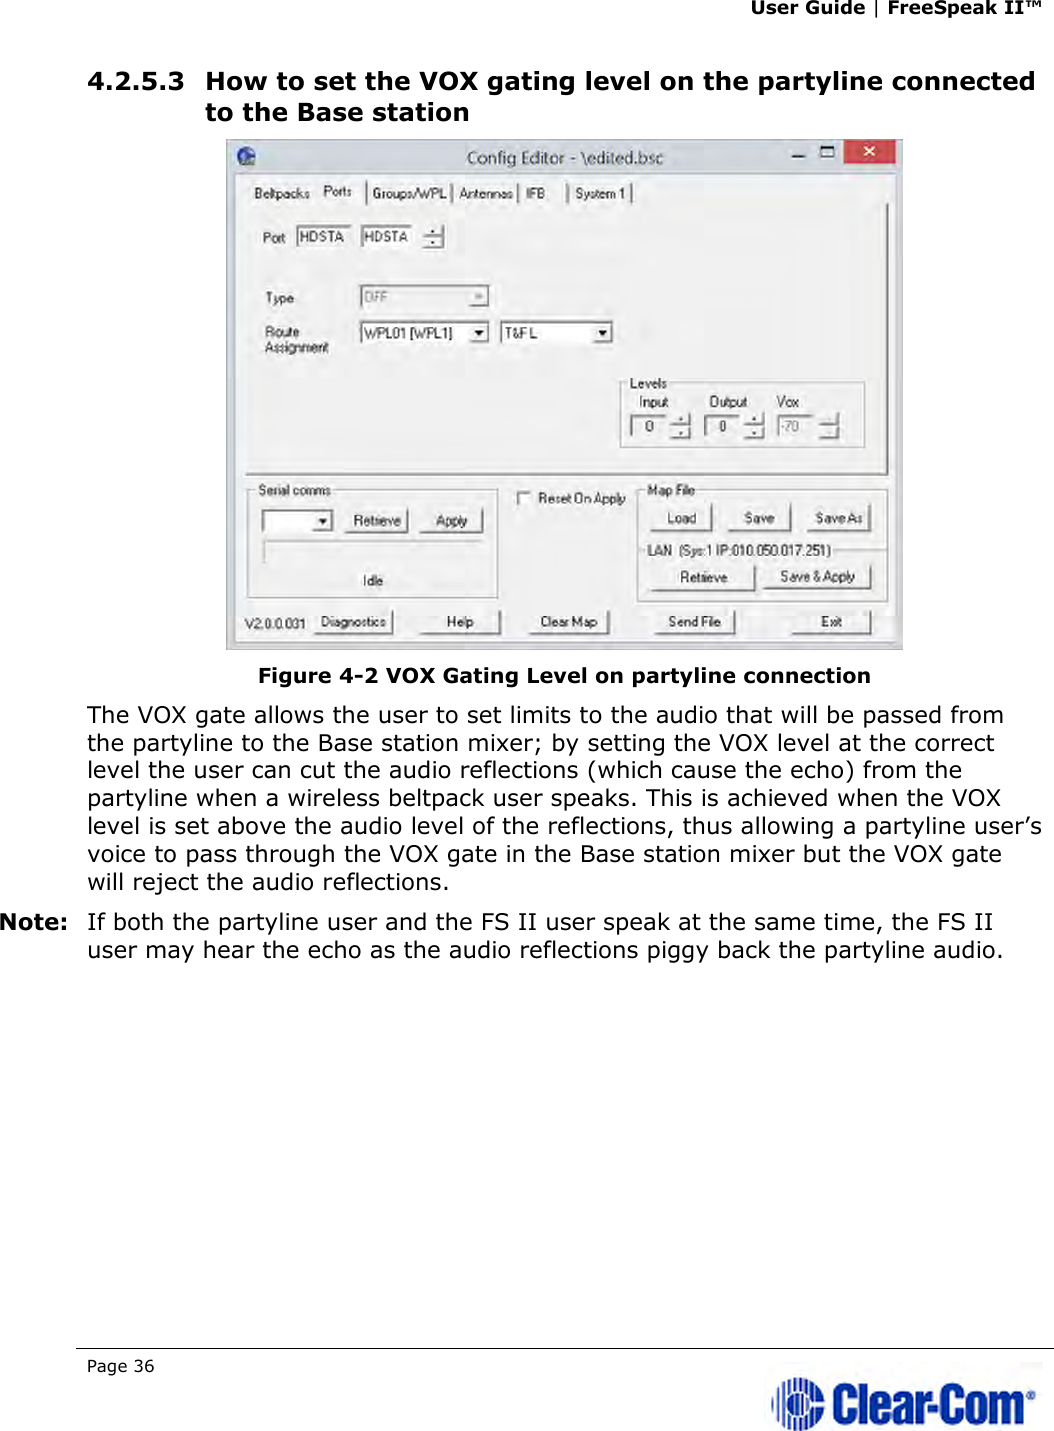 User Guide | FreeSpeak II™  Page 36   4.2.5.3 How to set the VOX gating level on the partyline connected to the Base station  Figure 4-2 VOX Gating Level on partyline connection The VOX gate allows the user to set limits to the audio that will be passed from the partyline to the Base station mixer; by setting the VOX level at the correct level the user can cut the audio reflections (which cause the echo) from the partyline when a wireless beltpack user speaks. This is achieved when the VOX level is set above the audio level of the reflections, thus allowing a partyline user’s voice to pass through the VOX gate in the Base station mixer but the VOX gate will reject the audio reflections. Note: If both the partyline user and the FS II user speak at the same time, the FS II user may hear the echo as the audio reflections piggy back the partyline audio.  